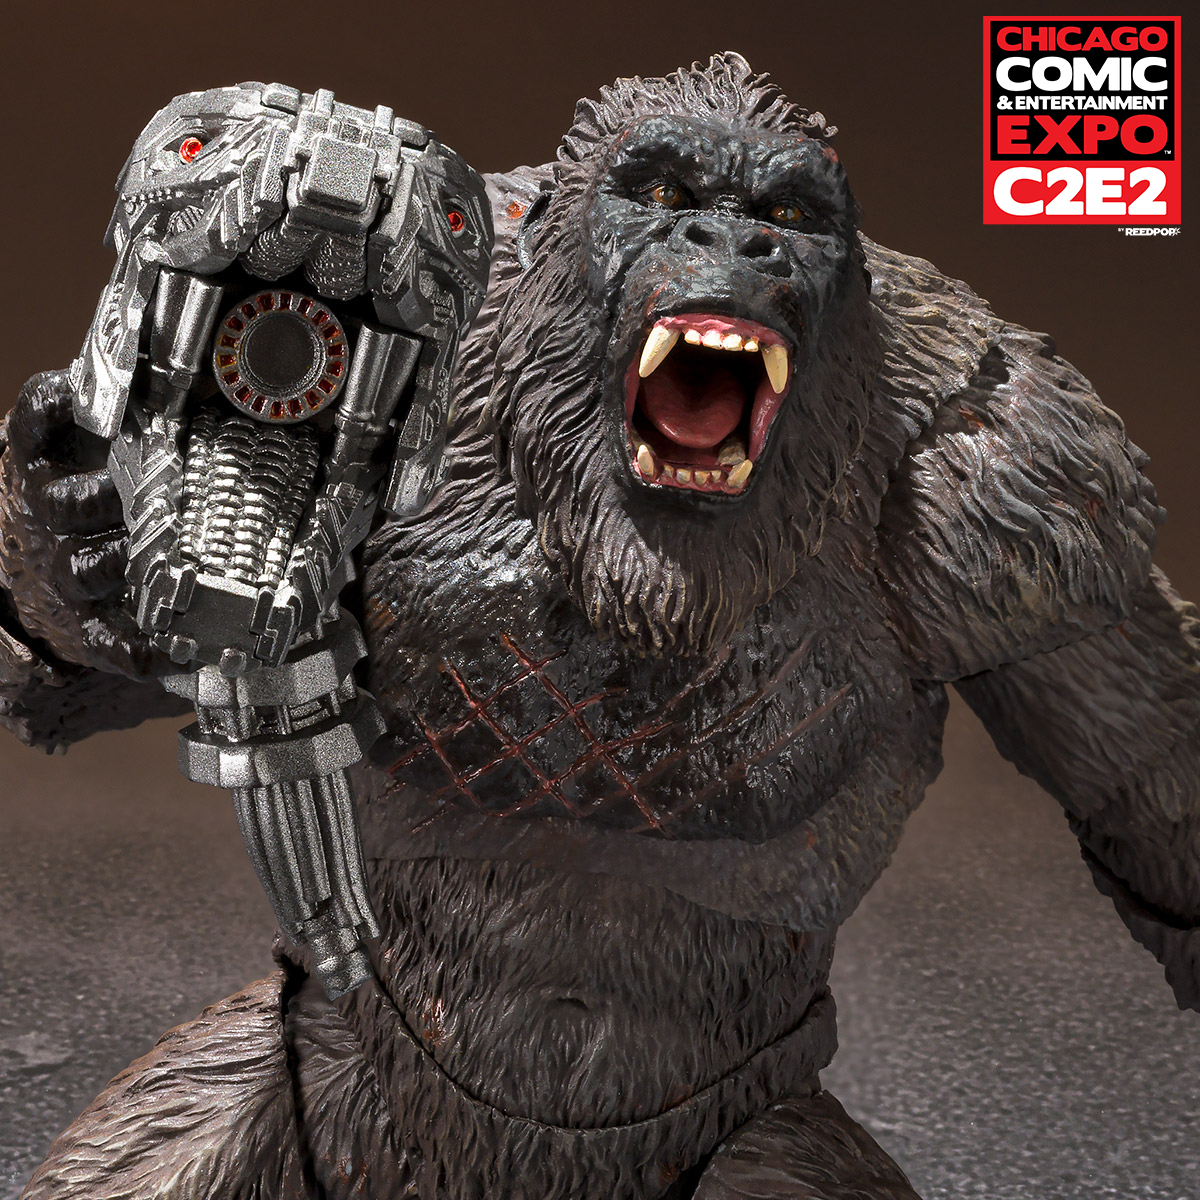 C2E2 Event Pick-up] KONG FROM GODZILLA VS. KONG (2021)  -Exclusive Edition- PREMIUM BANDAI USA Online Store for Action Figures,  Model Kits, Toys and more